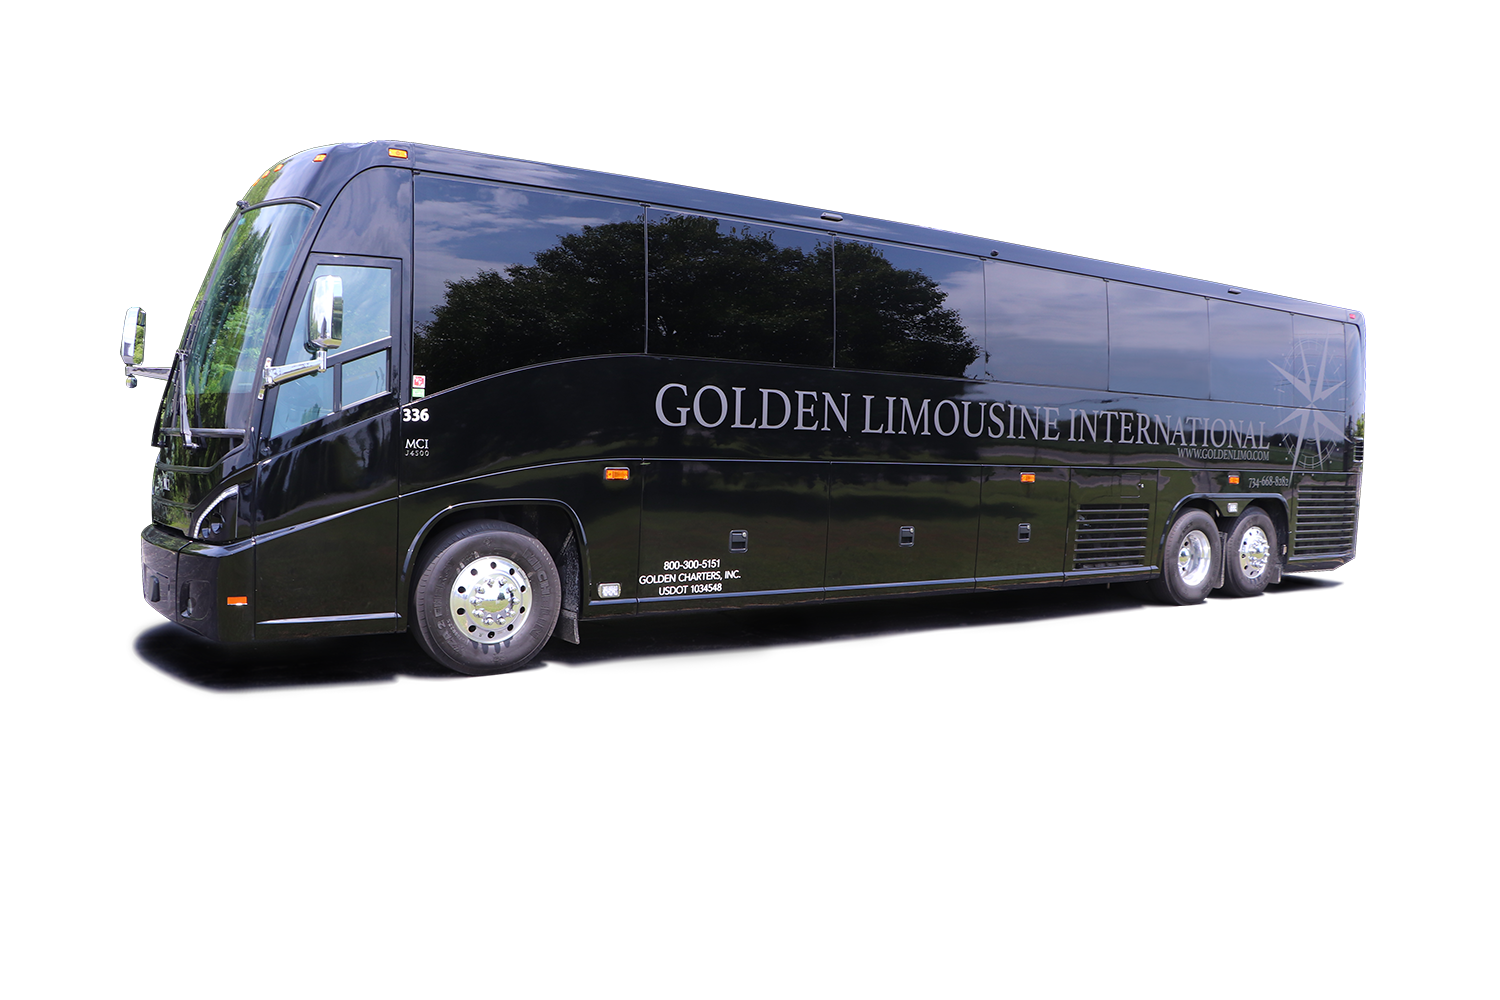 Golden Limo Charter Bus side image with logo